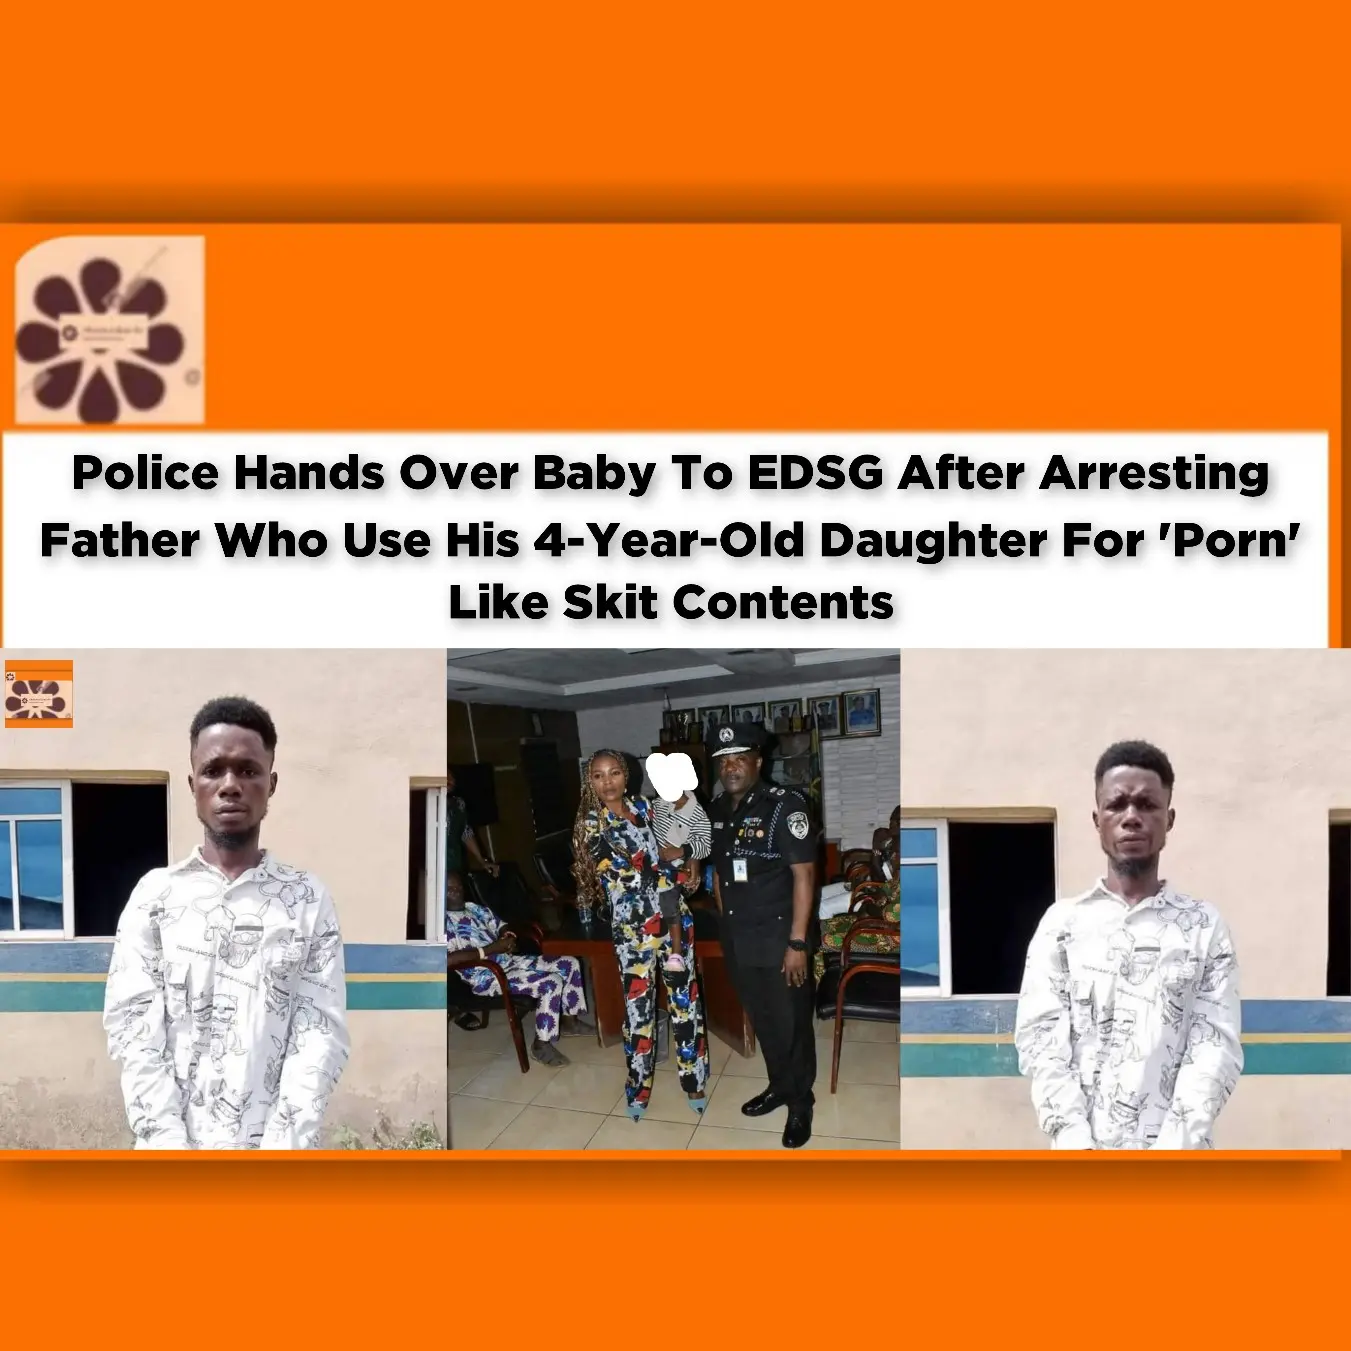 Police Hands Over Baby To EDSG After Arresting Father Who Use His 4-Year-Old Daughter For 'Porn' Like Skit Contents ~ OsazuwaAkonedo #Northeast